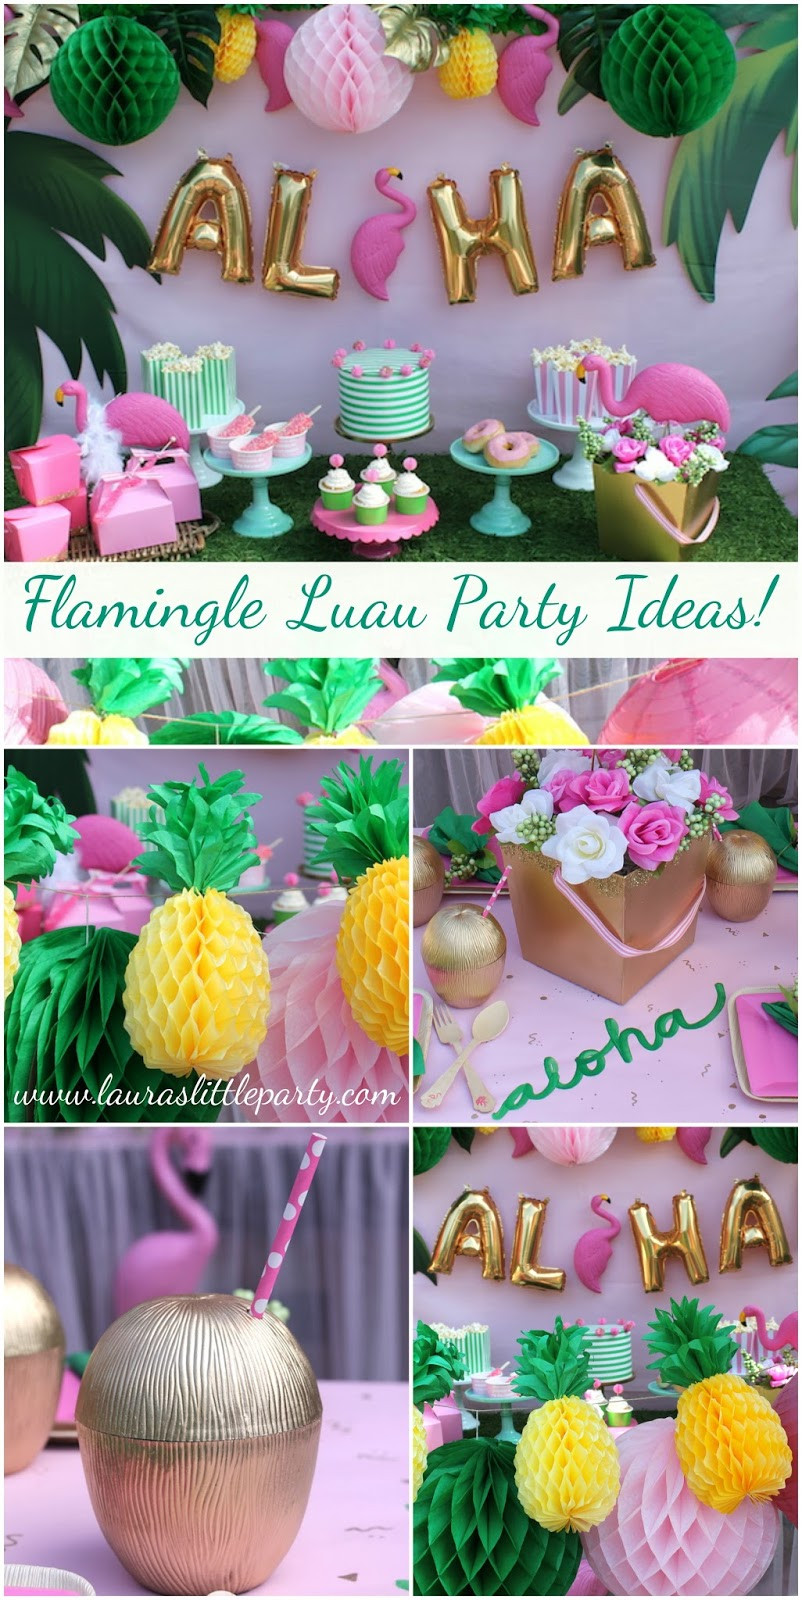 Ideas For A Summer Party
 Let s Flamingle Luau Summer Party Ideas LAURA S little